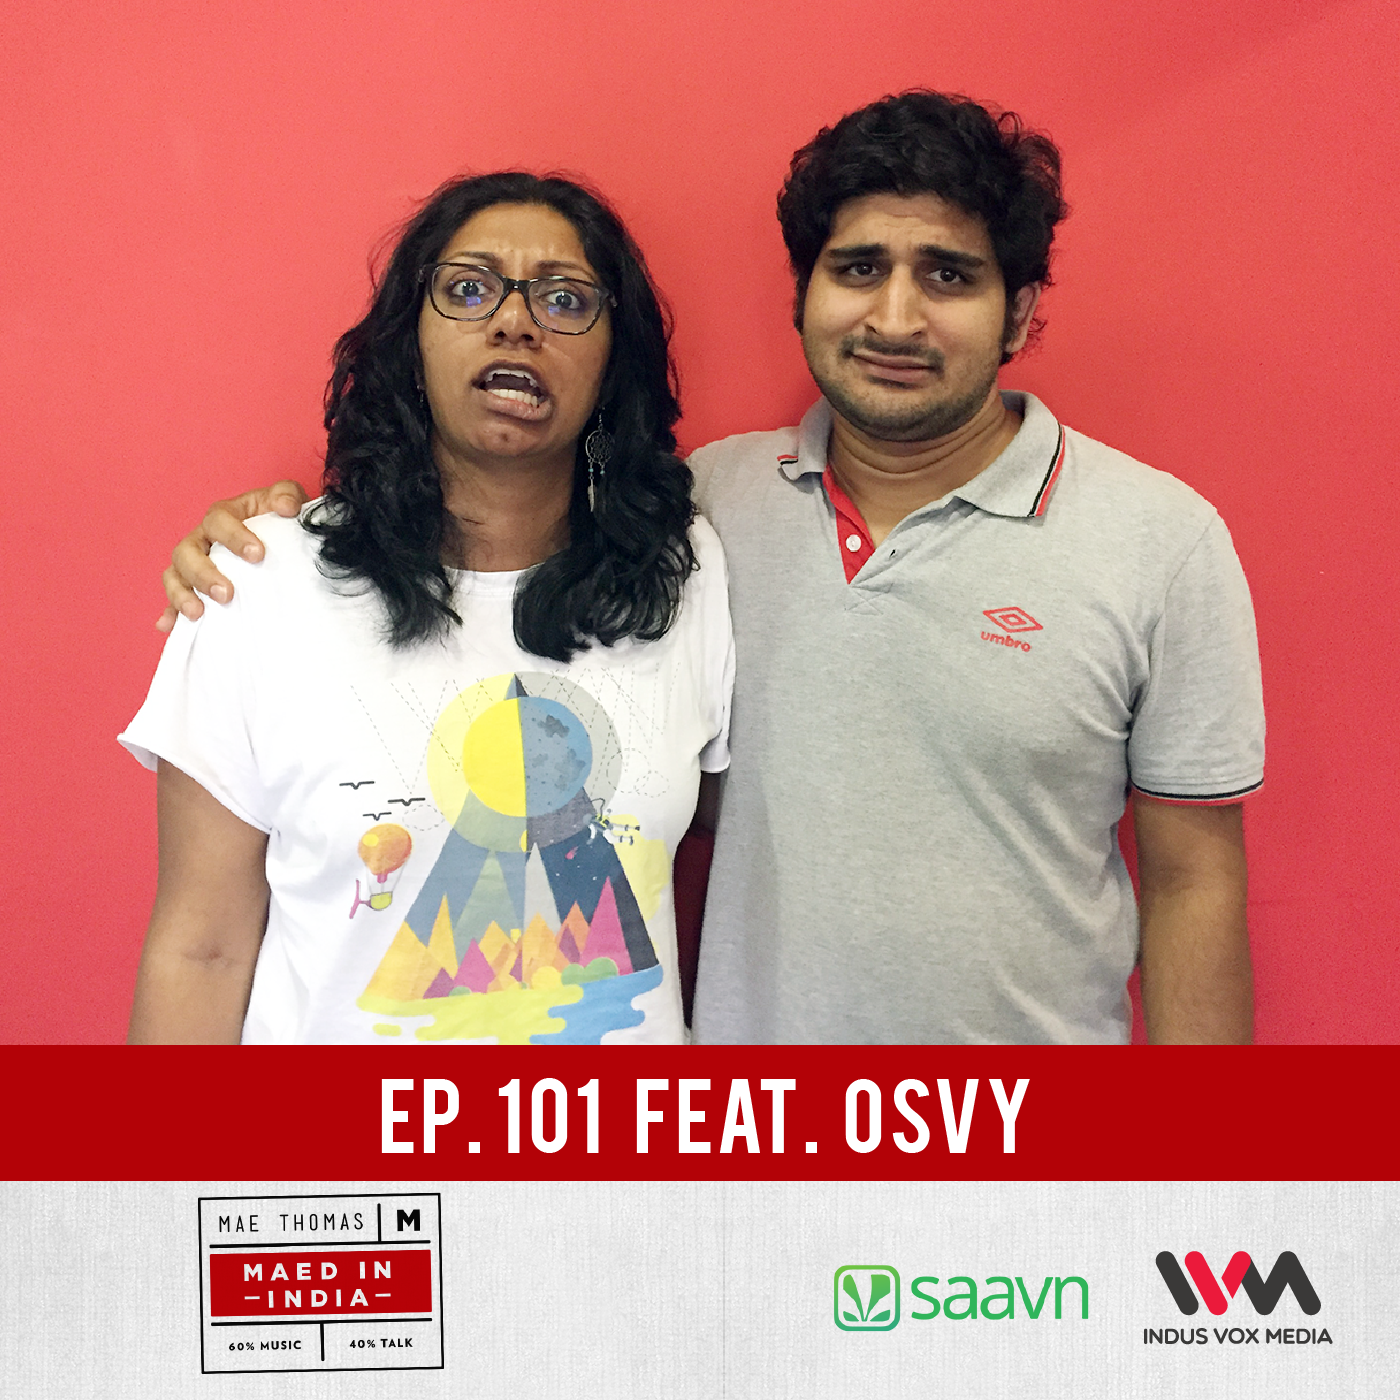 Ep. 101 feat. OSVY